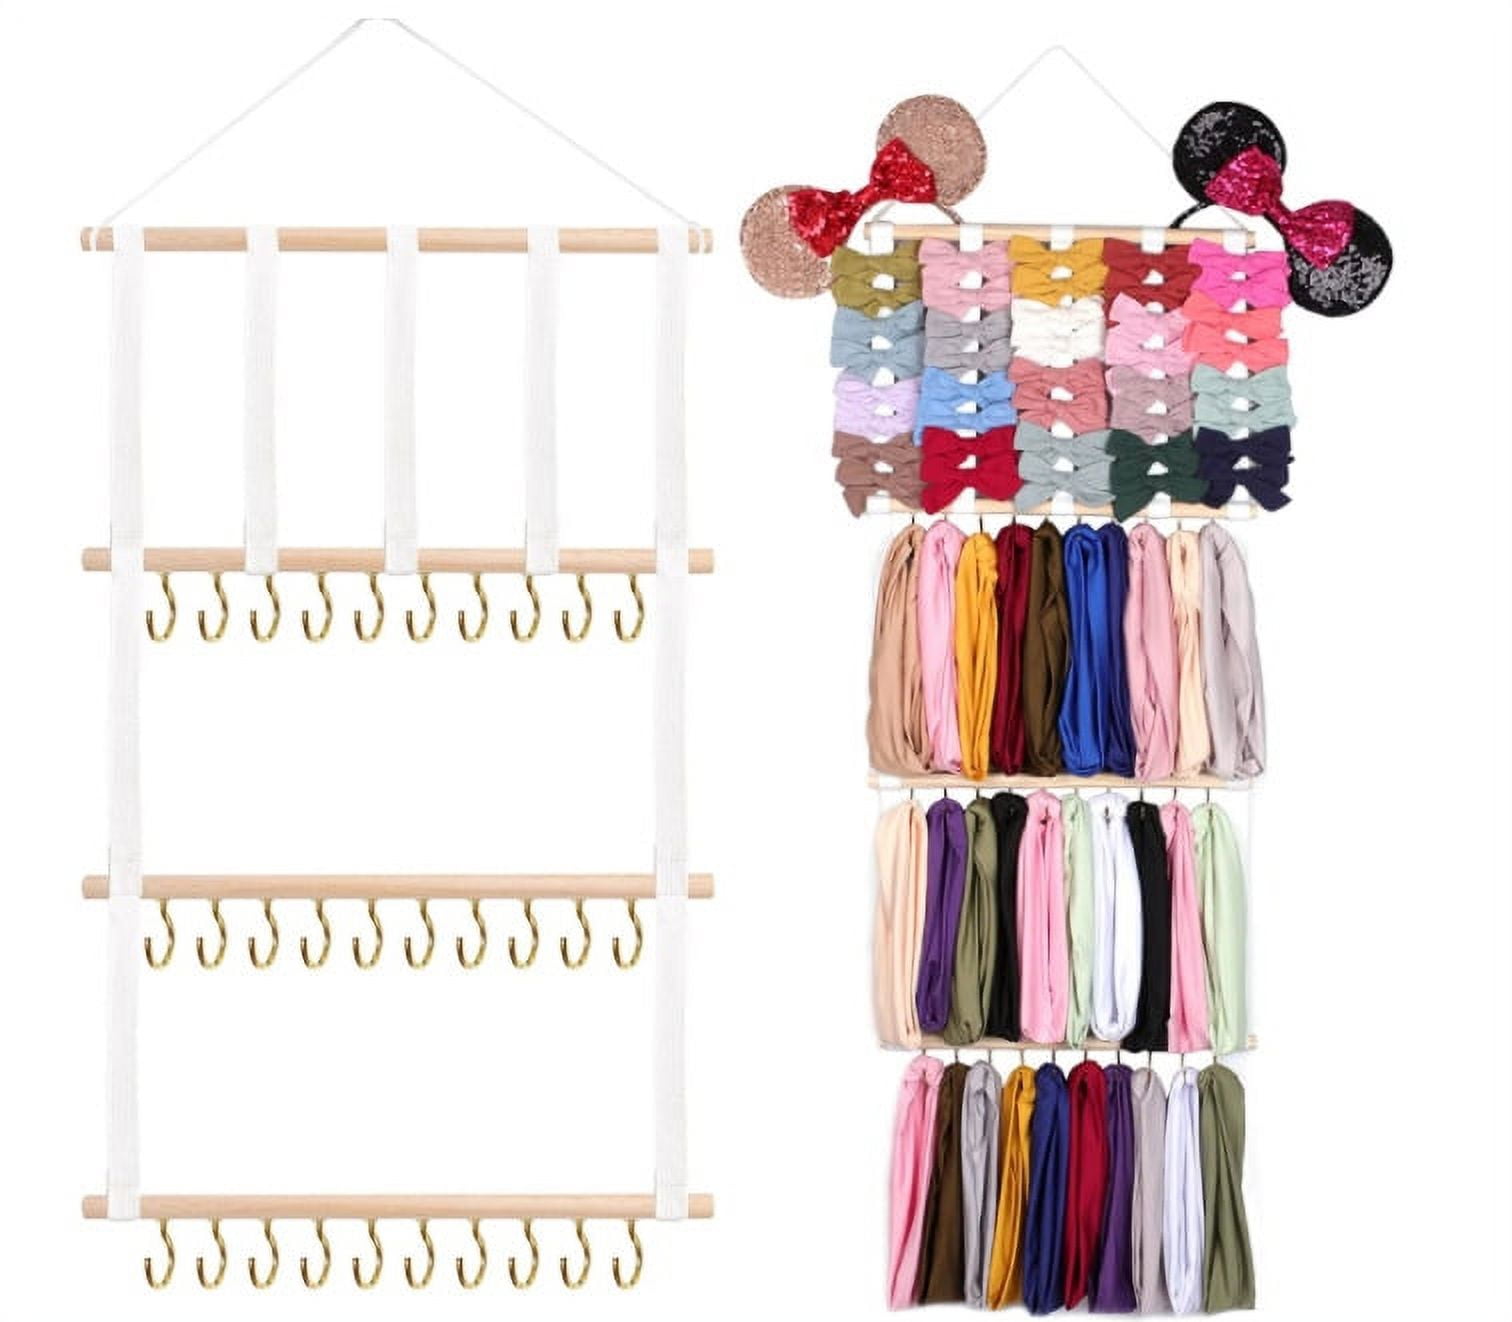 SYBL 12 Pack Hair Bow and Hair Clip Holder Organizer and Storage Headband Hanger Hanging Jewelry Organizers for Baby Girls(Mix Color)